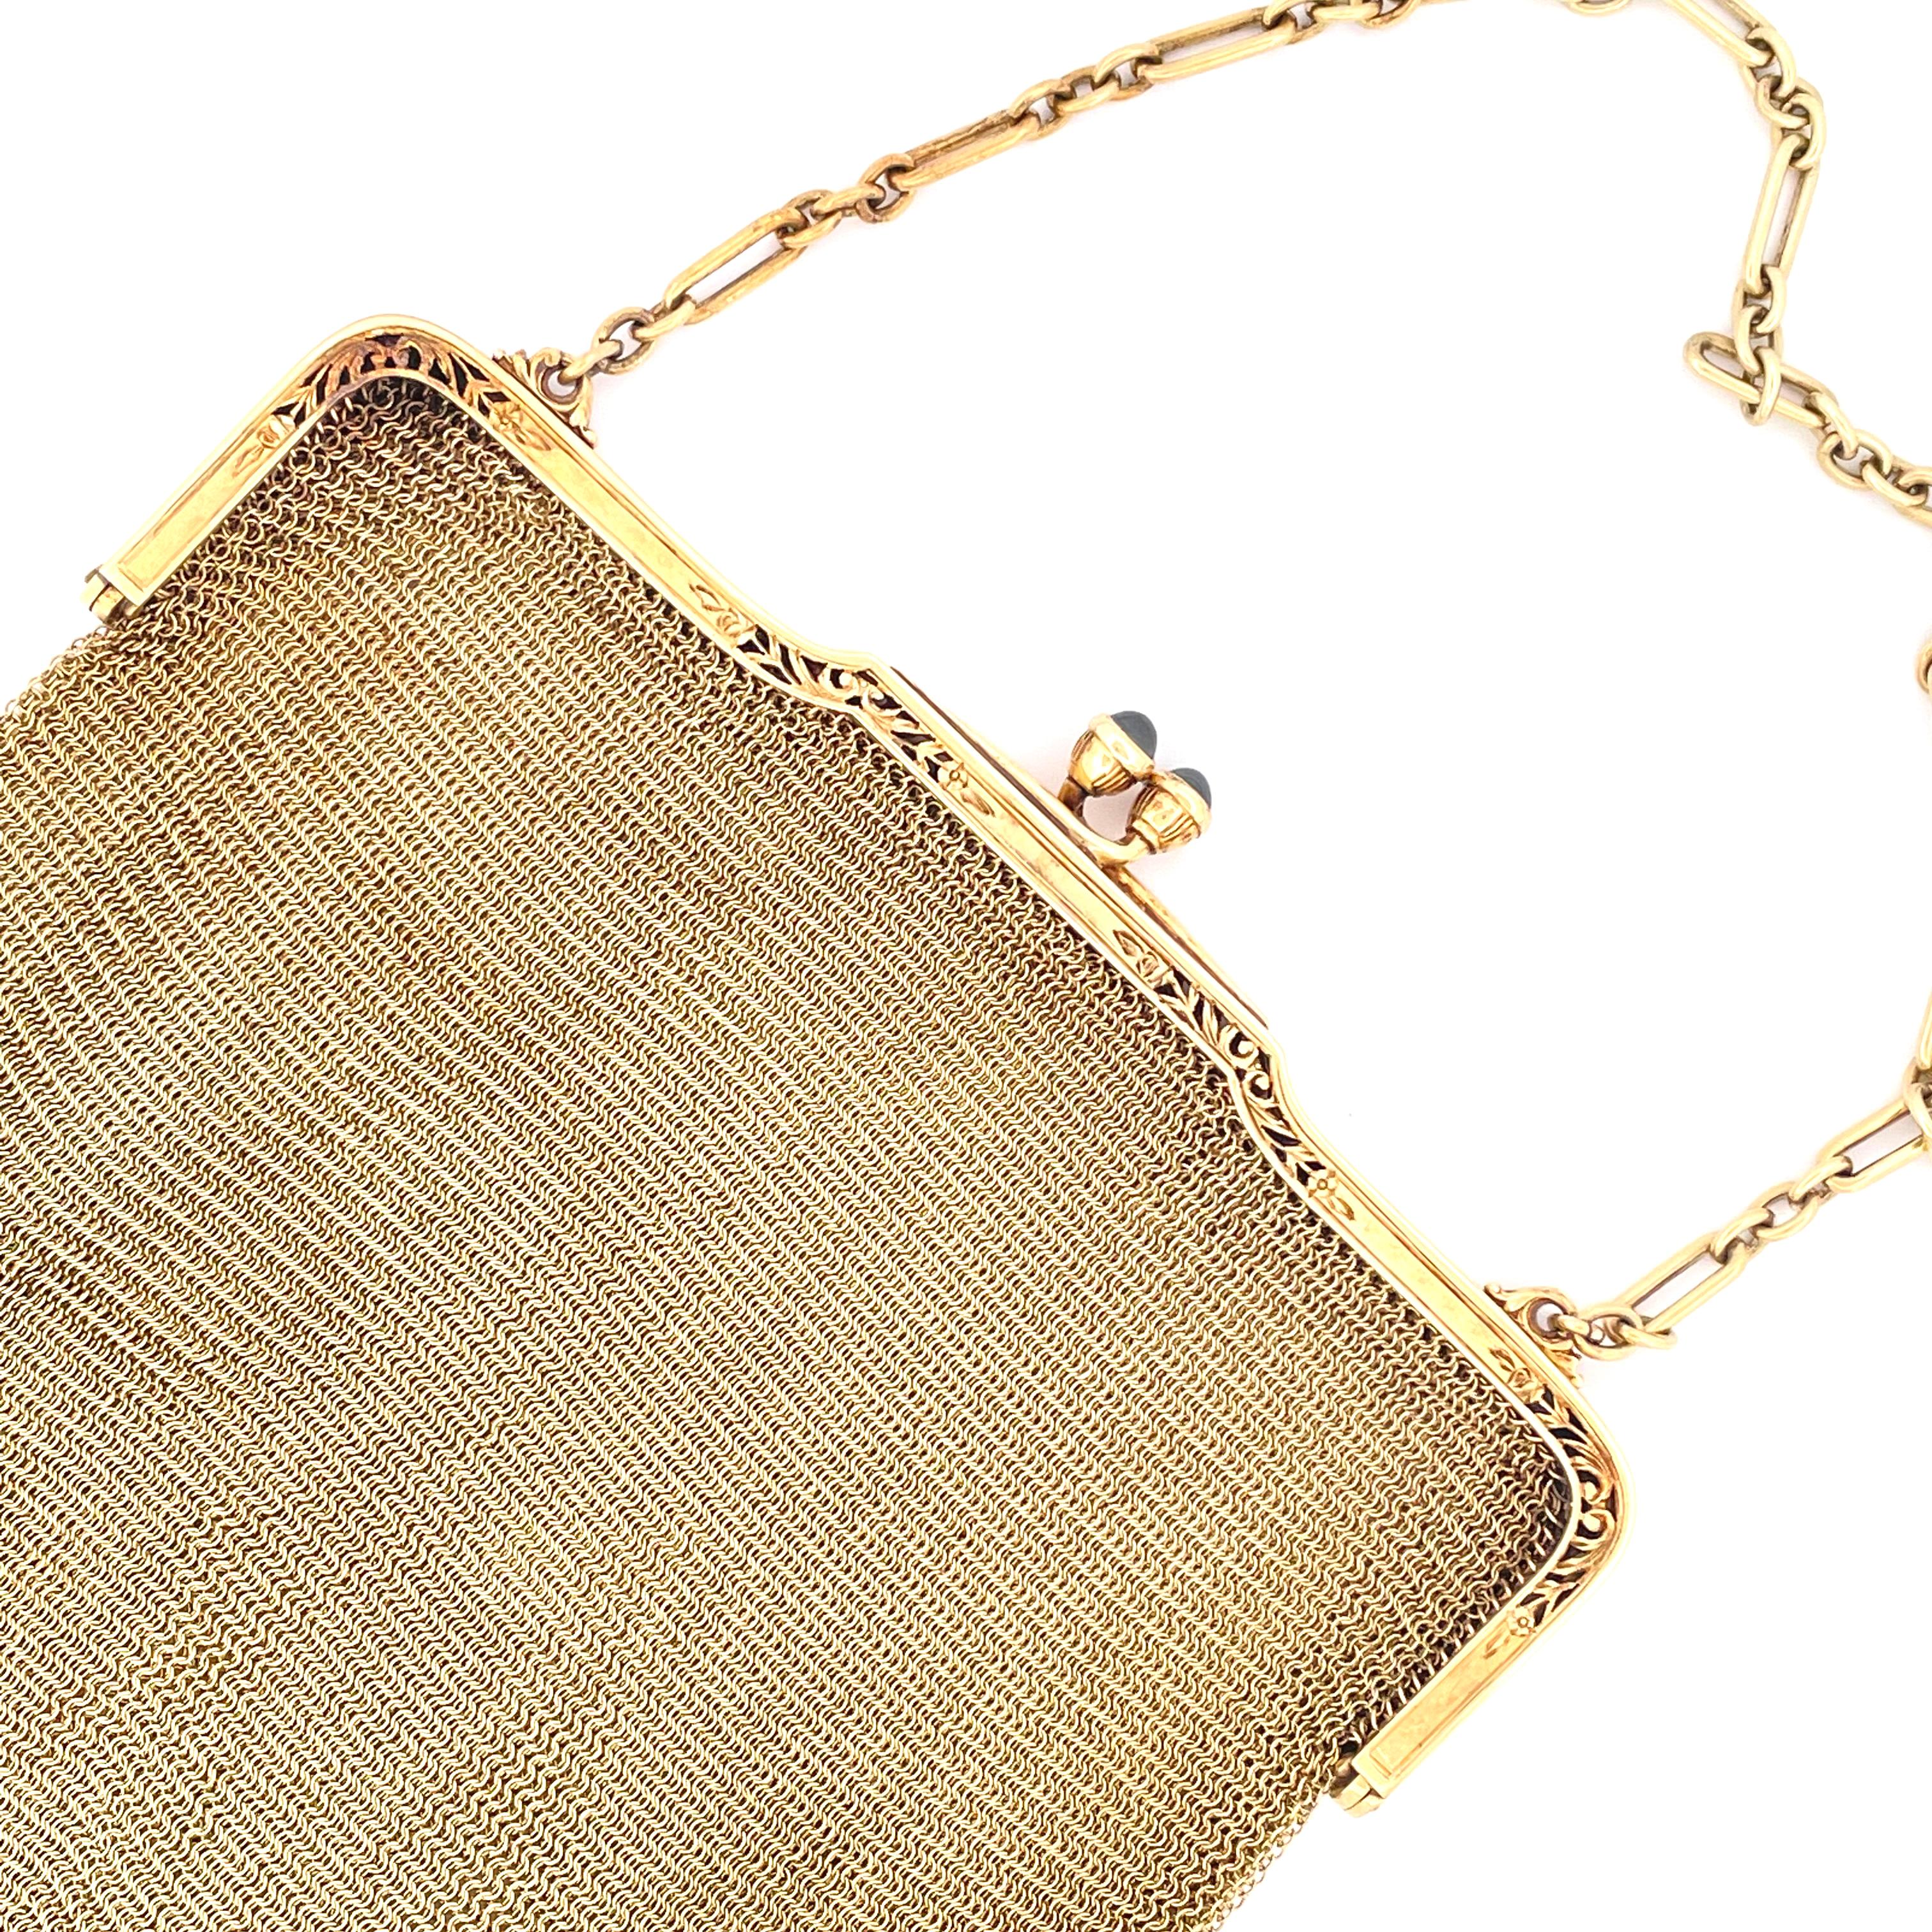 Make your time luxurious with this
unique and exquisite Tiffany & Co Timeless Purse,
made from 14K yellow gold, this Purse is a
statement piece that will add elegance and sophistication to you. 

